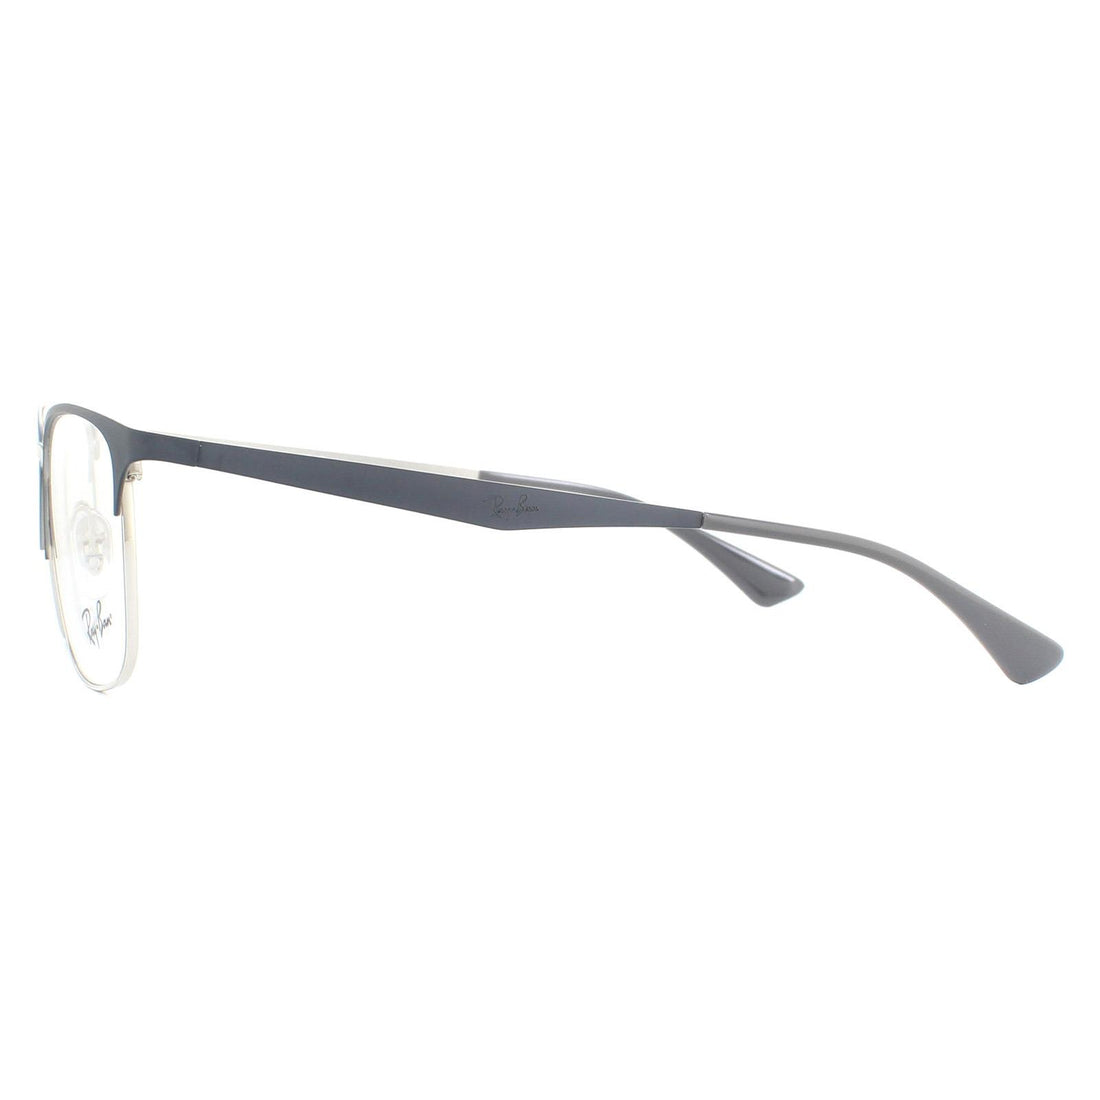 Ray-Ban Glasses Frames RX6421 3004 Grey and Silver 54mm